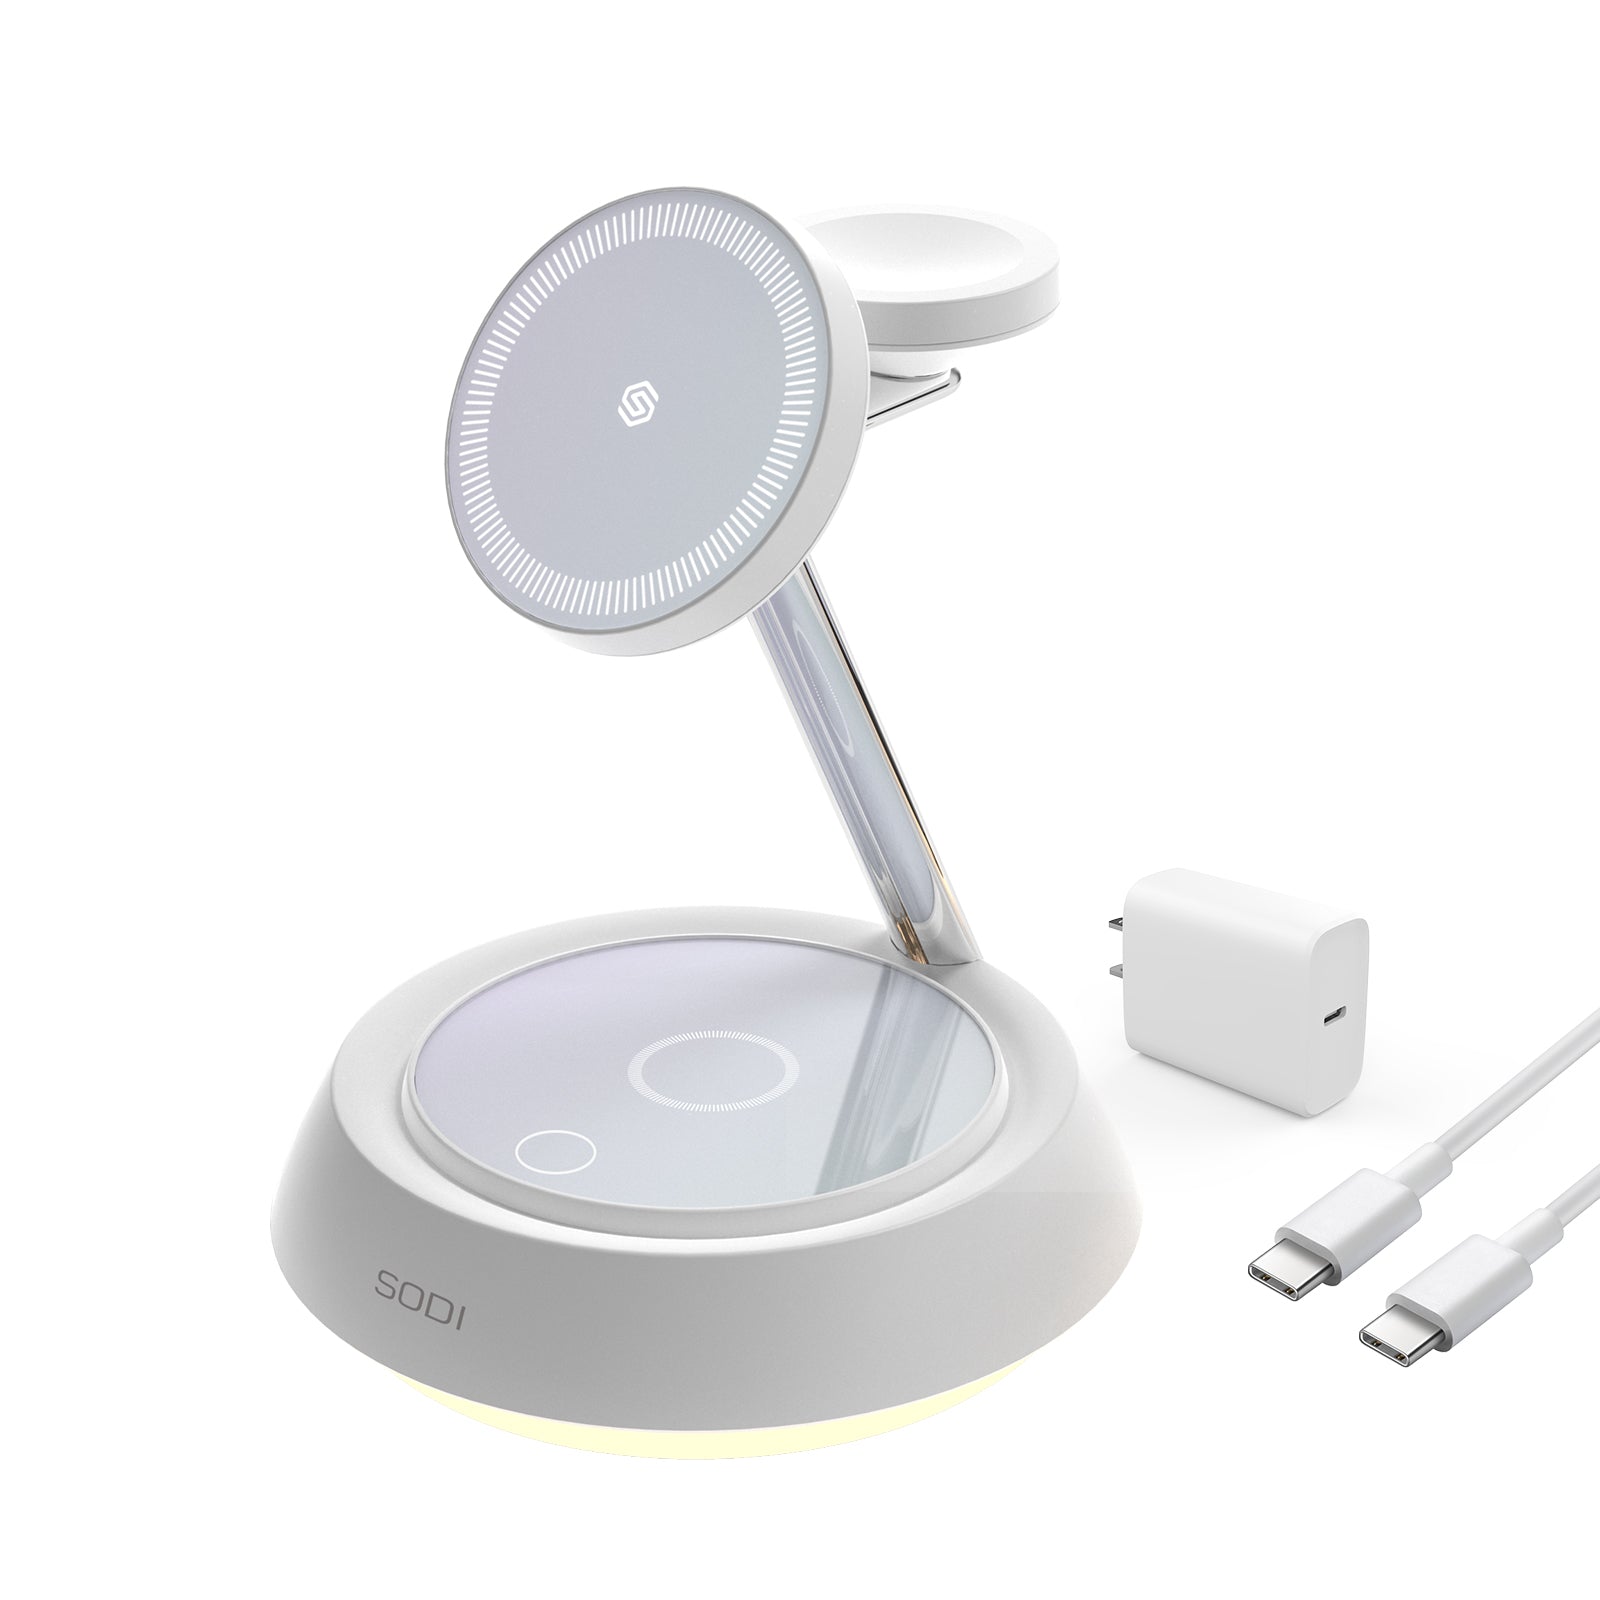 SODI T3 3-in-1 Magnetic 15W Wireless Charging Station for Apple Devices